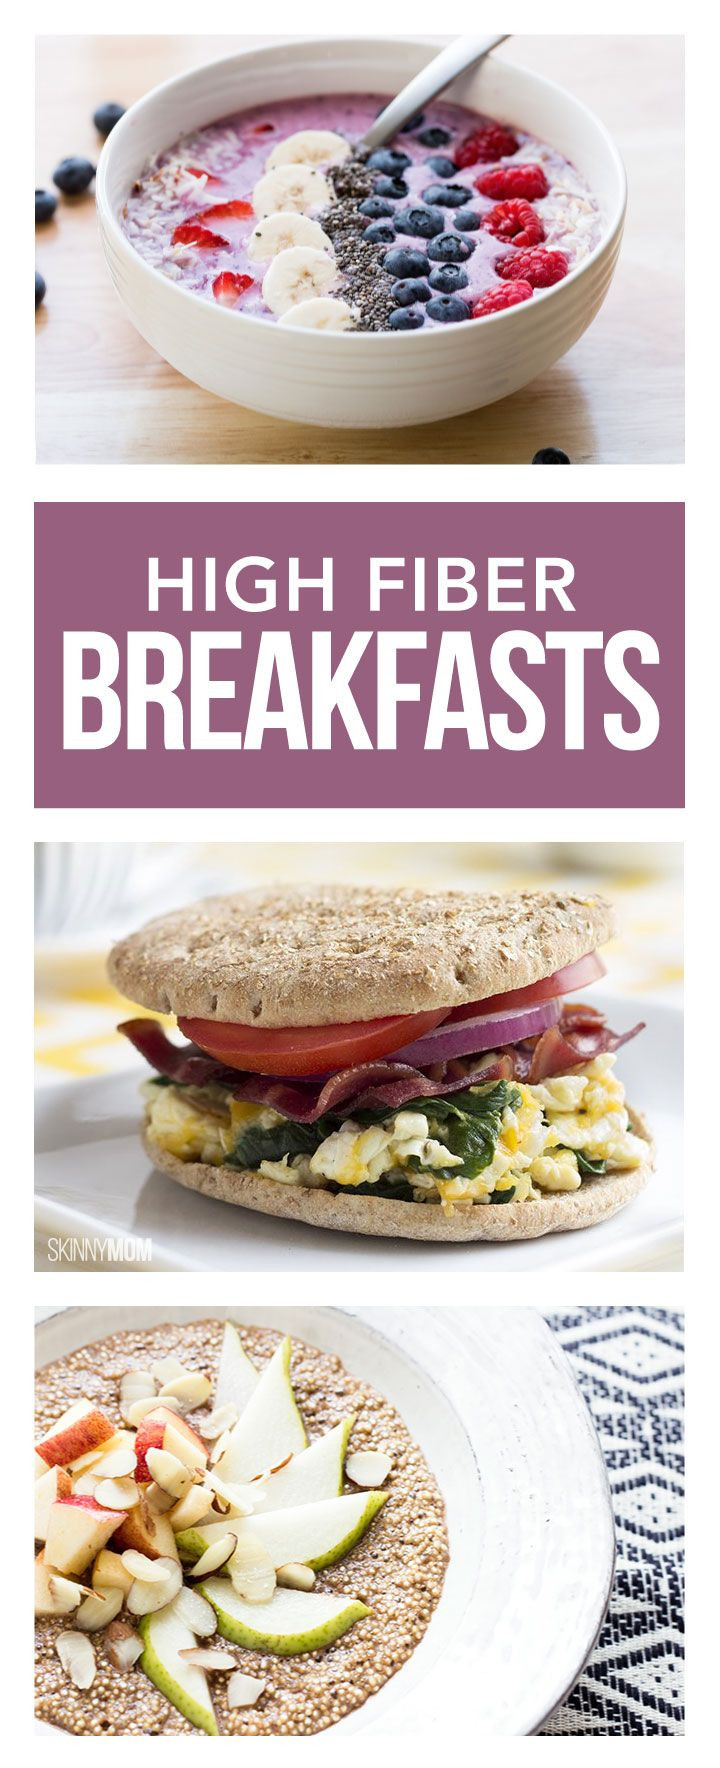 High Fiber Diet Recipes
 7 High Fiber Breakfasts To Power You Through To Lunch